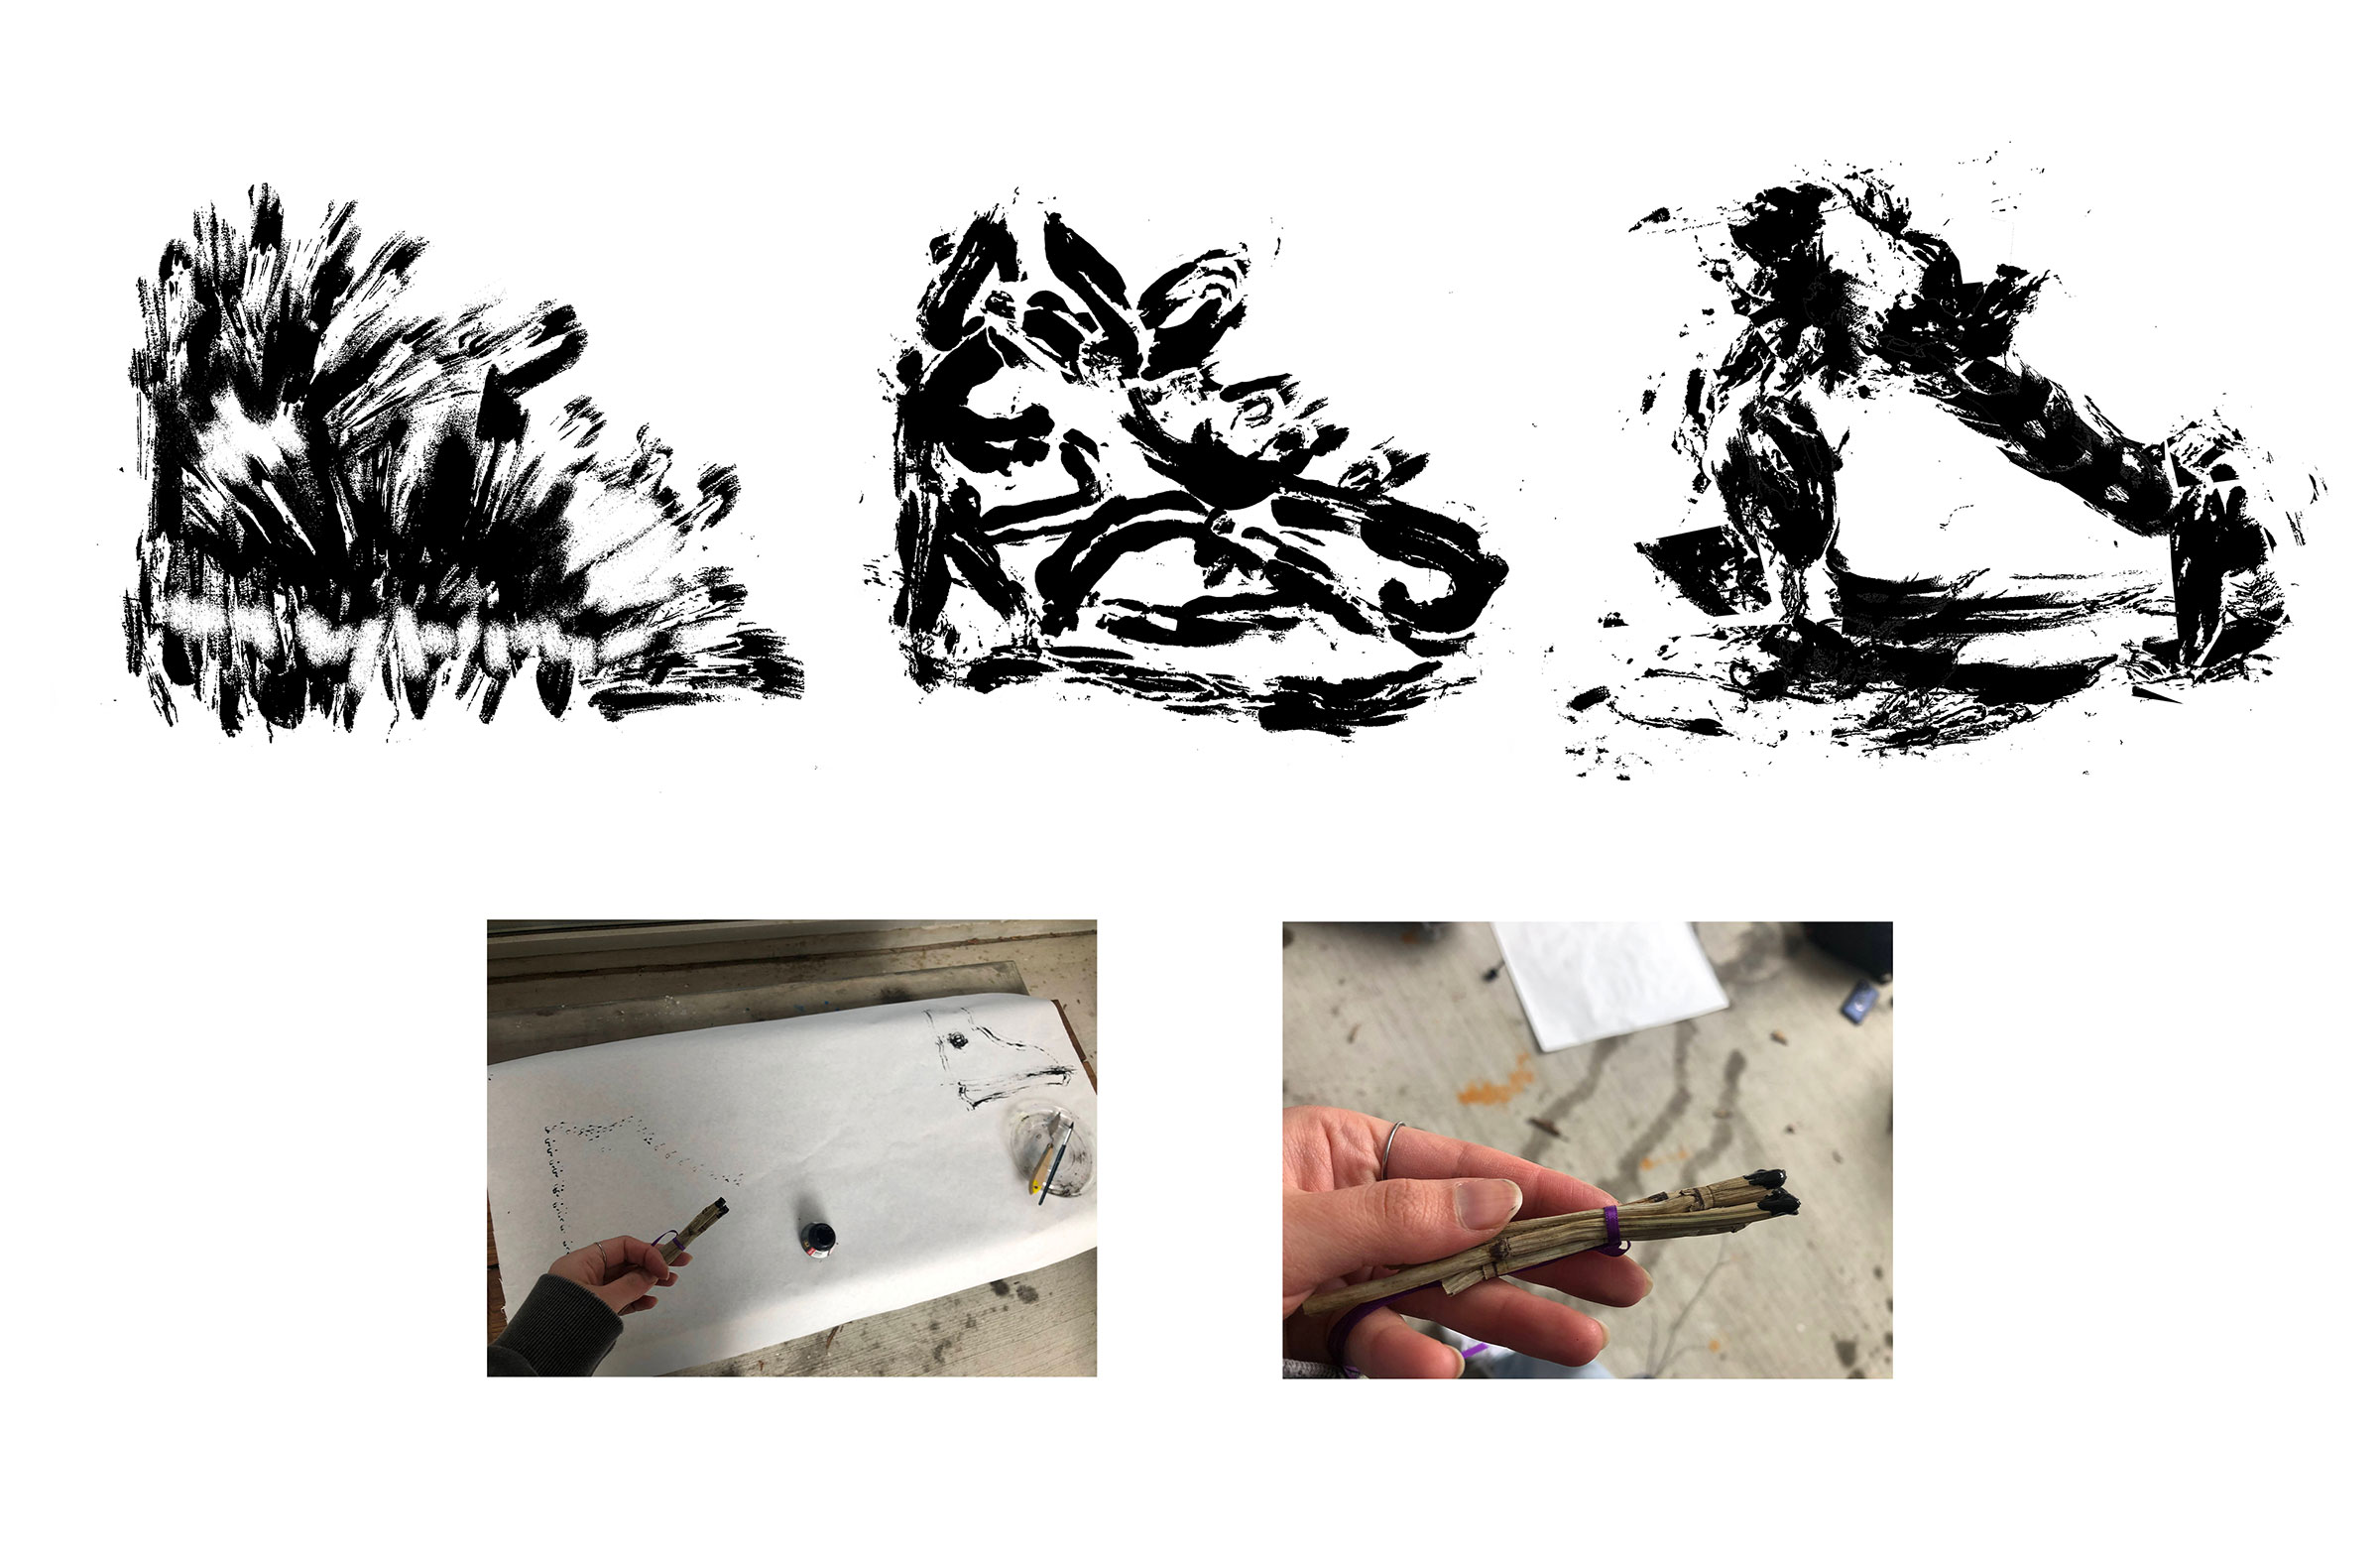 Textured drawings of a shoe using ink.